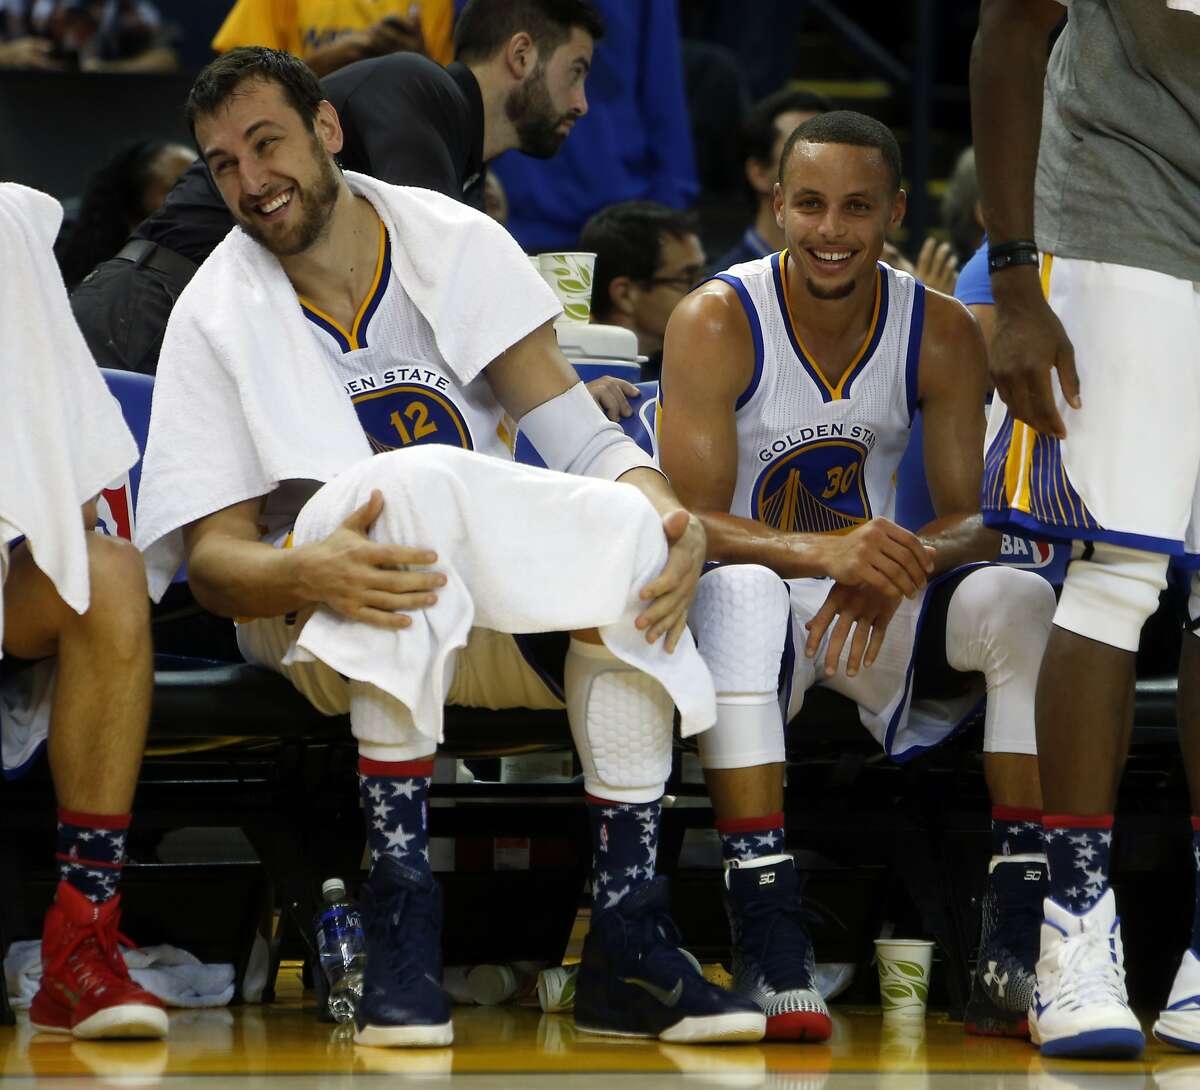 Golden State Warriors' Andrew Bogut and Stephen Curry enjoy themselves on bench late in 4th quarter of Warriors' 121-104 win over the Los Angeles Clippers during NBA game at Oracle Arena in Oakland, Calif., on Wednesday, November 5, 2014.